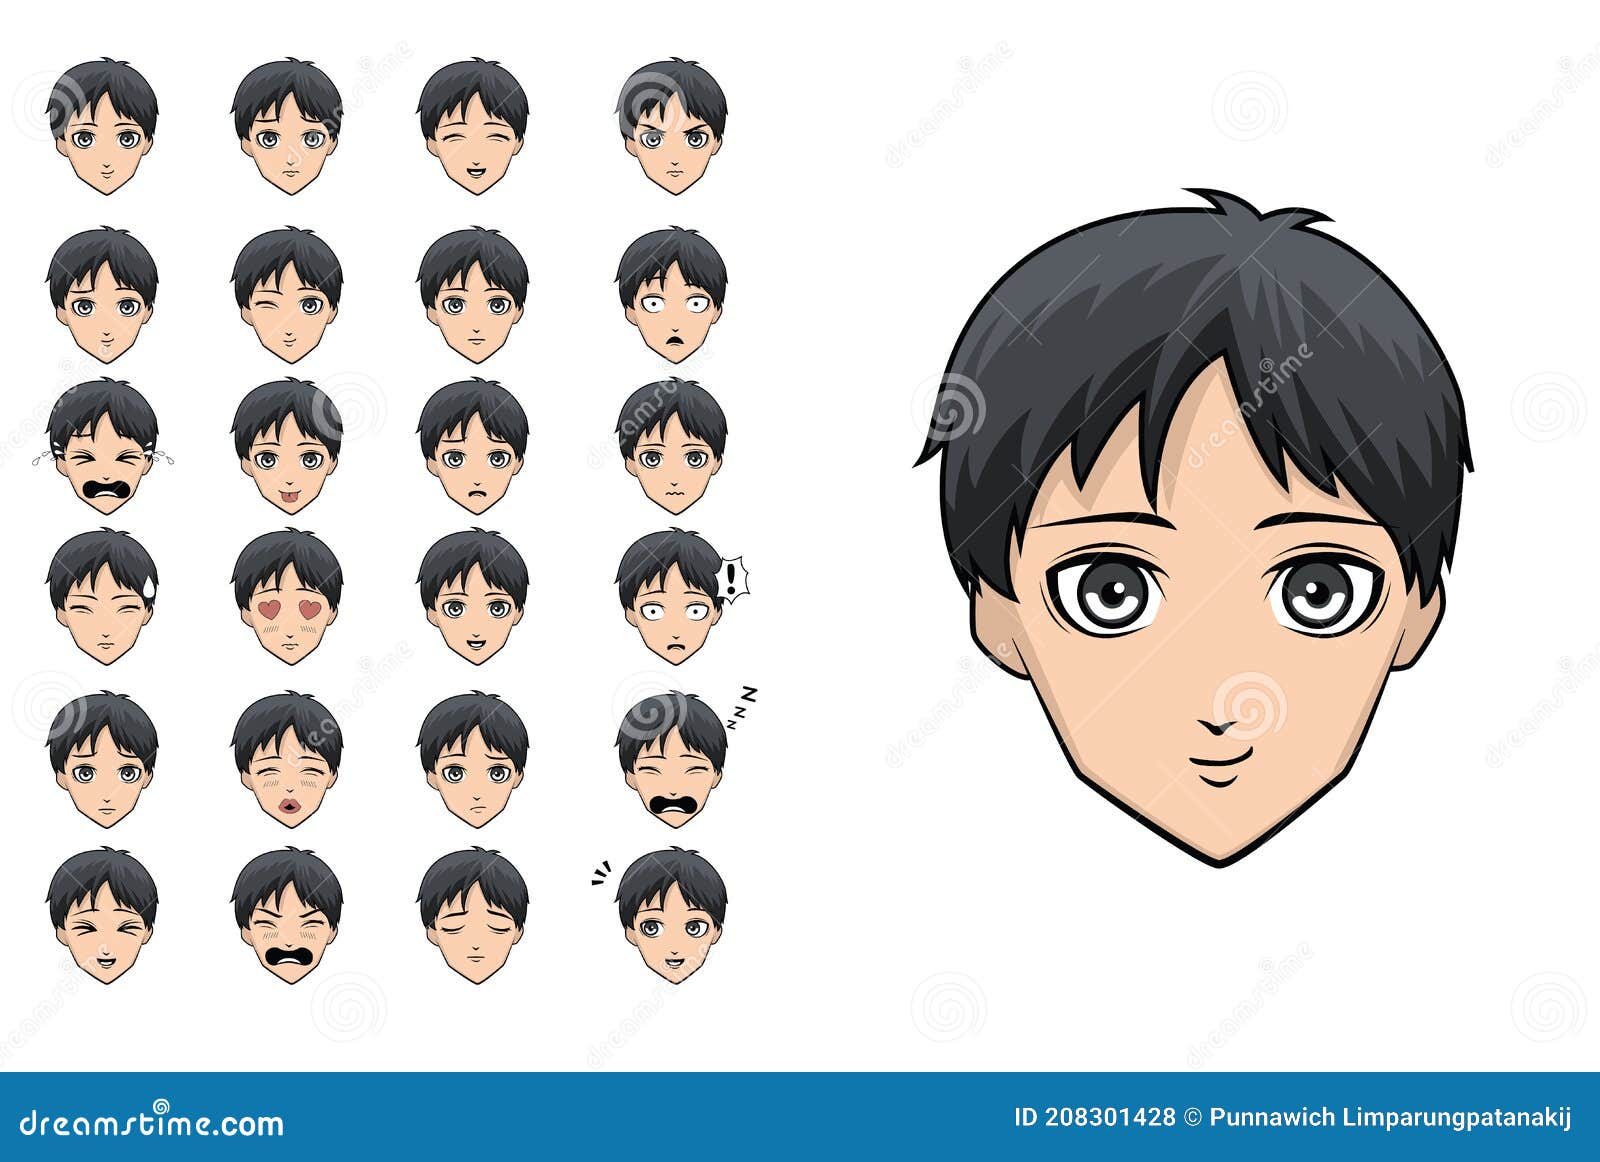 3207 Anime Guy Images Stock Photos  Vectors  Shutterstock